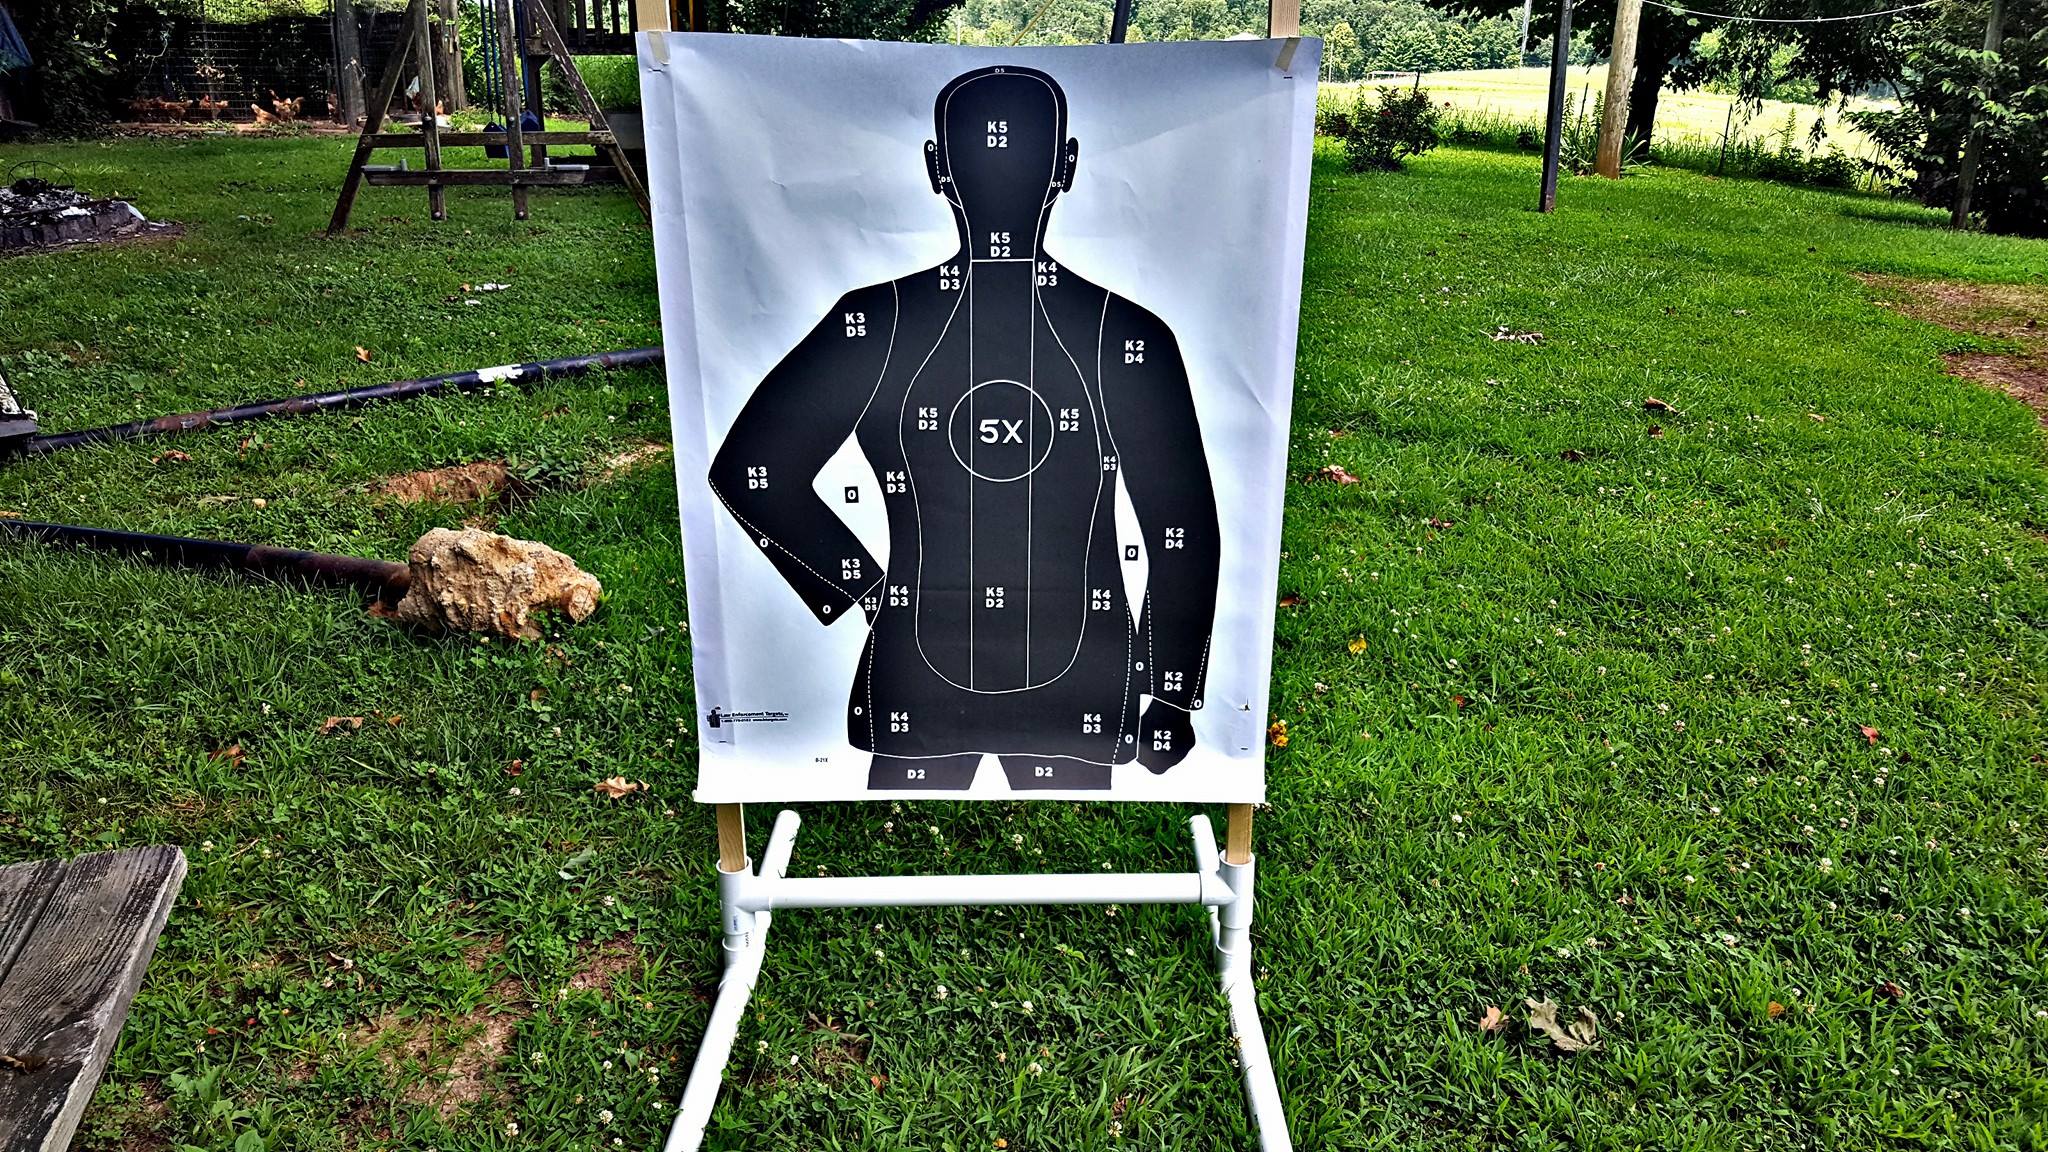 PVC target stands are perfect for holding a B21 target which is used in concealed carry classes